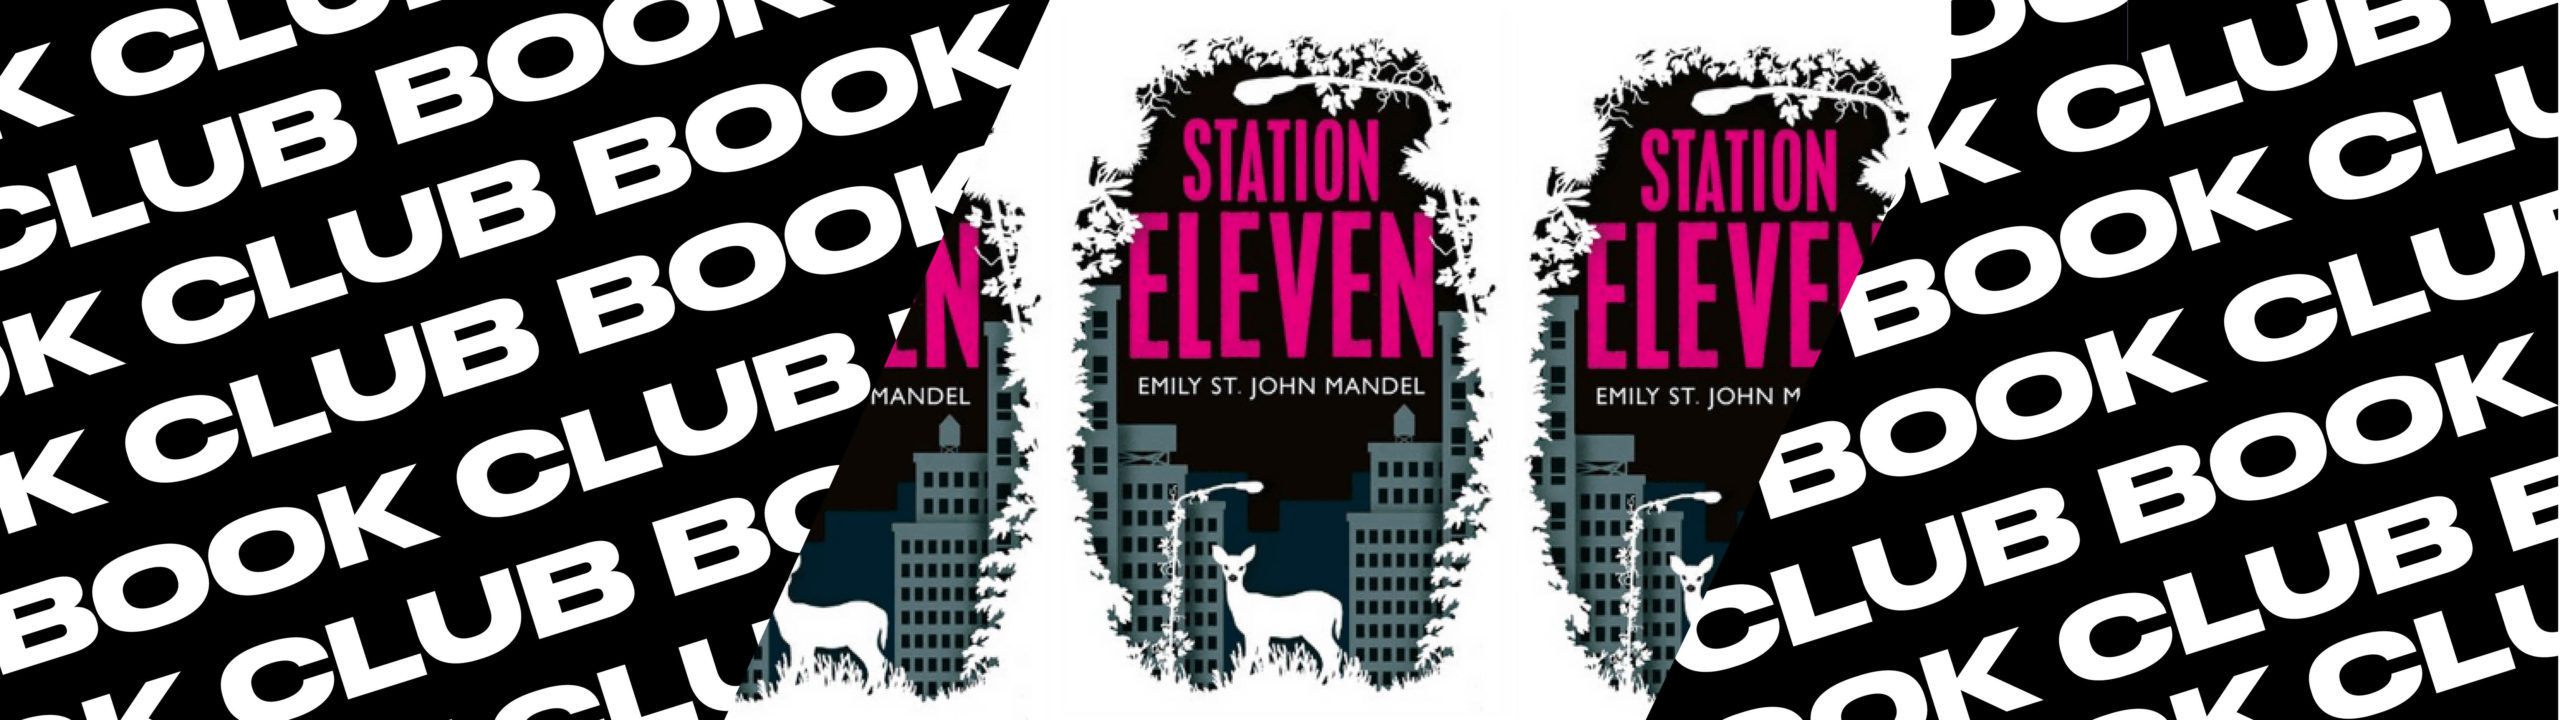 station eleve book club banners